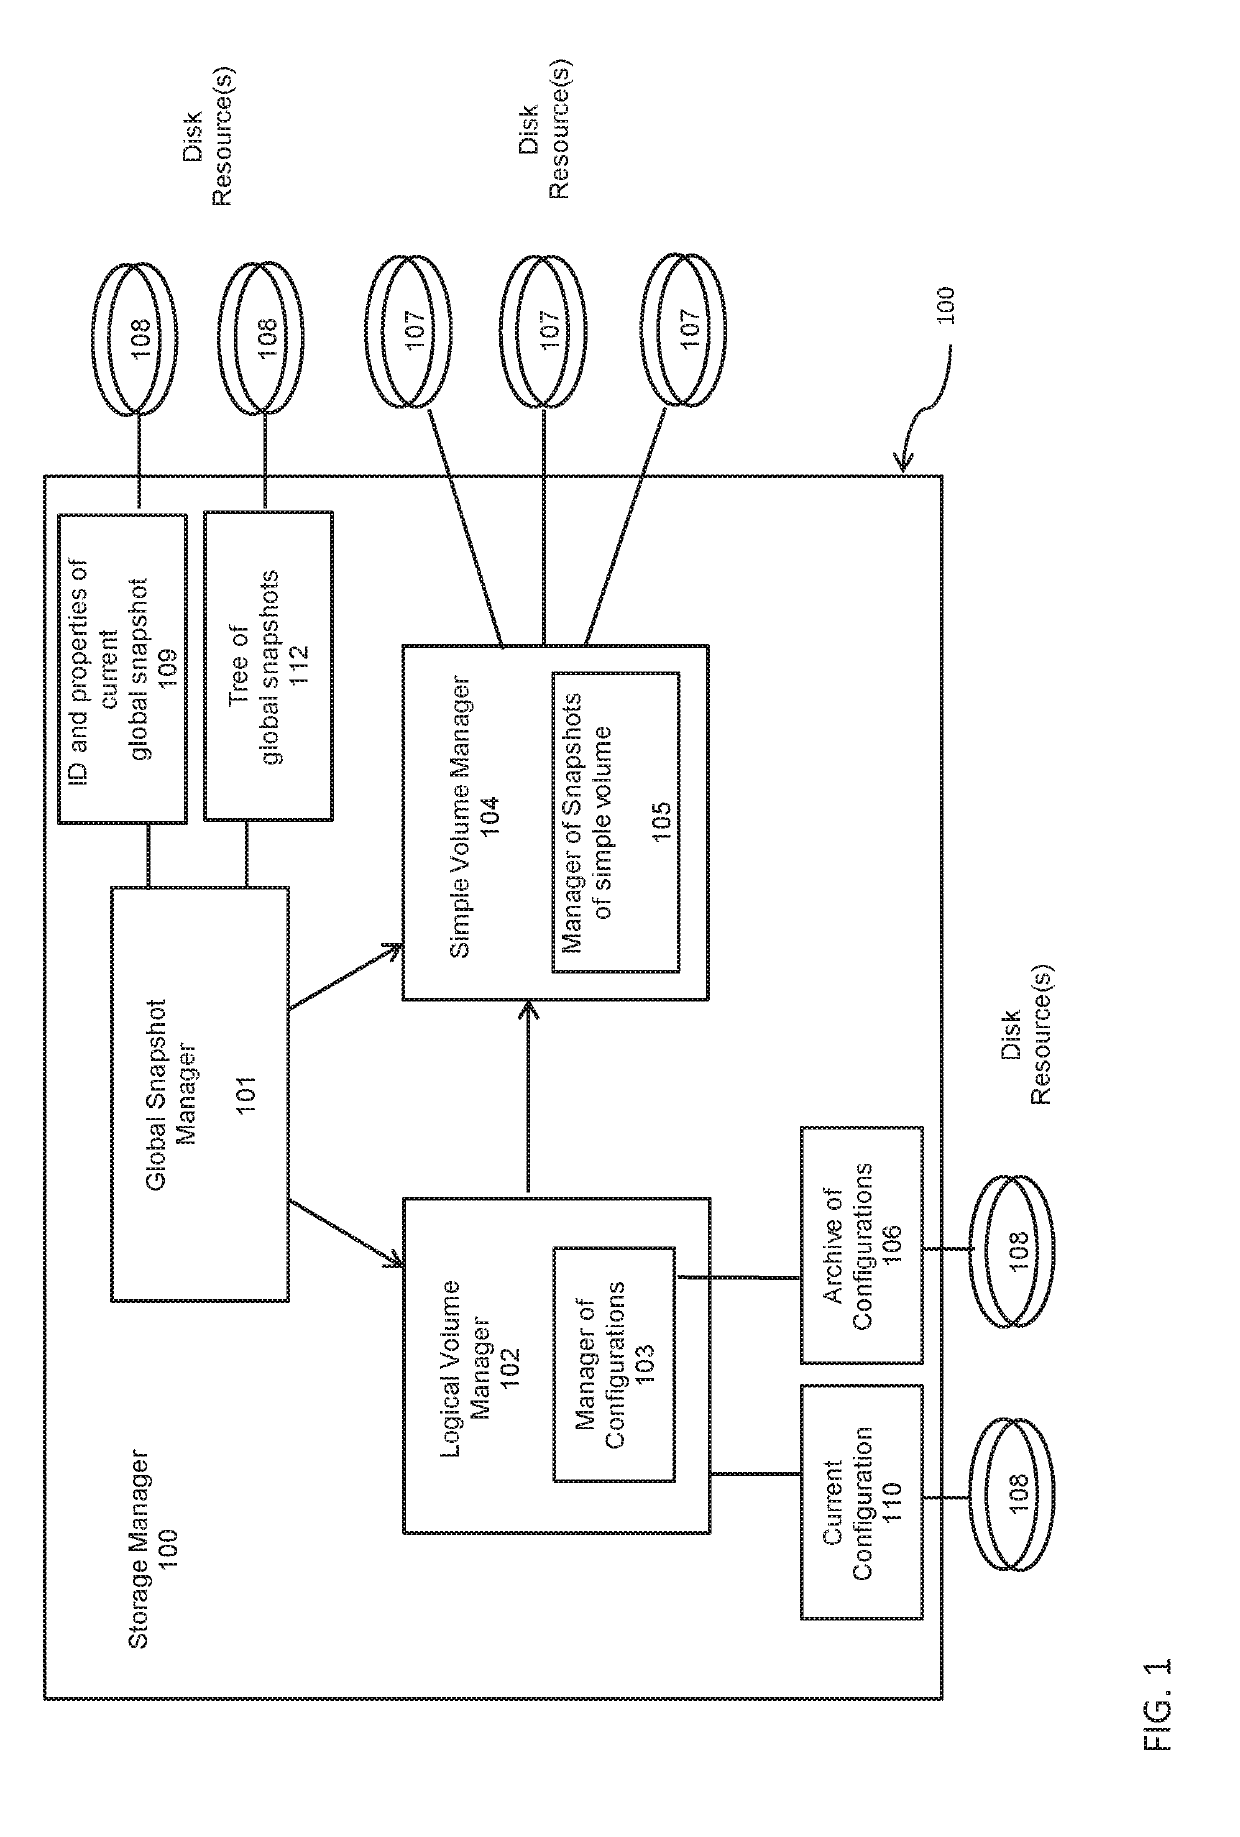 Method and system for global snapshots of distributed storage